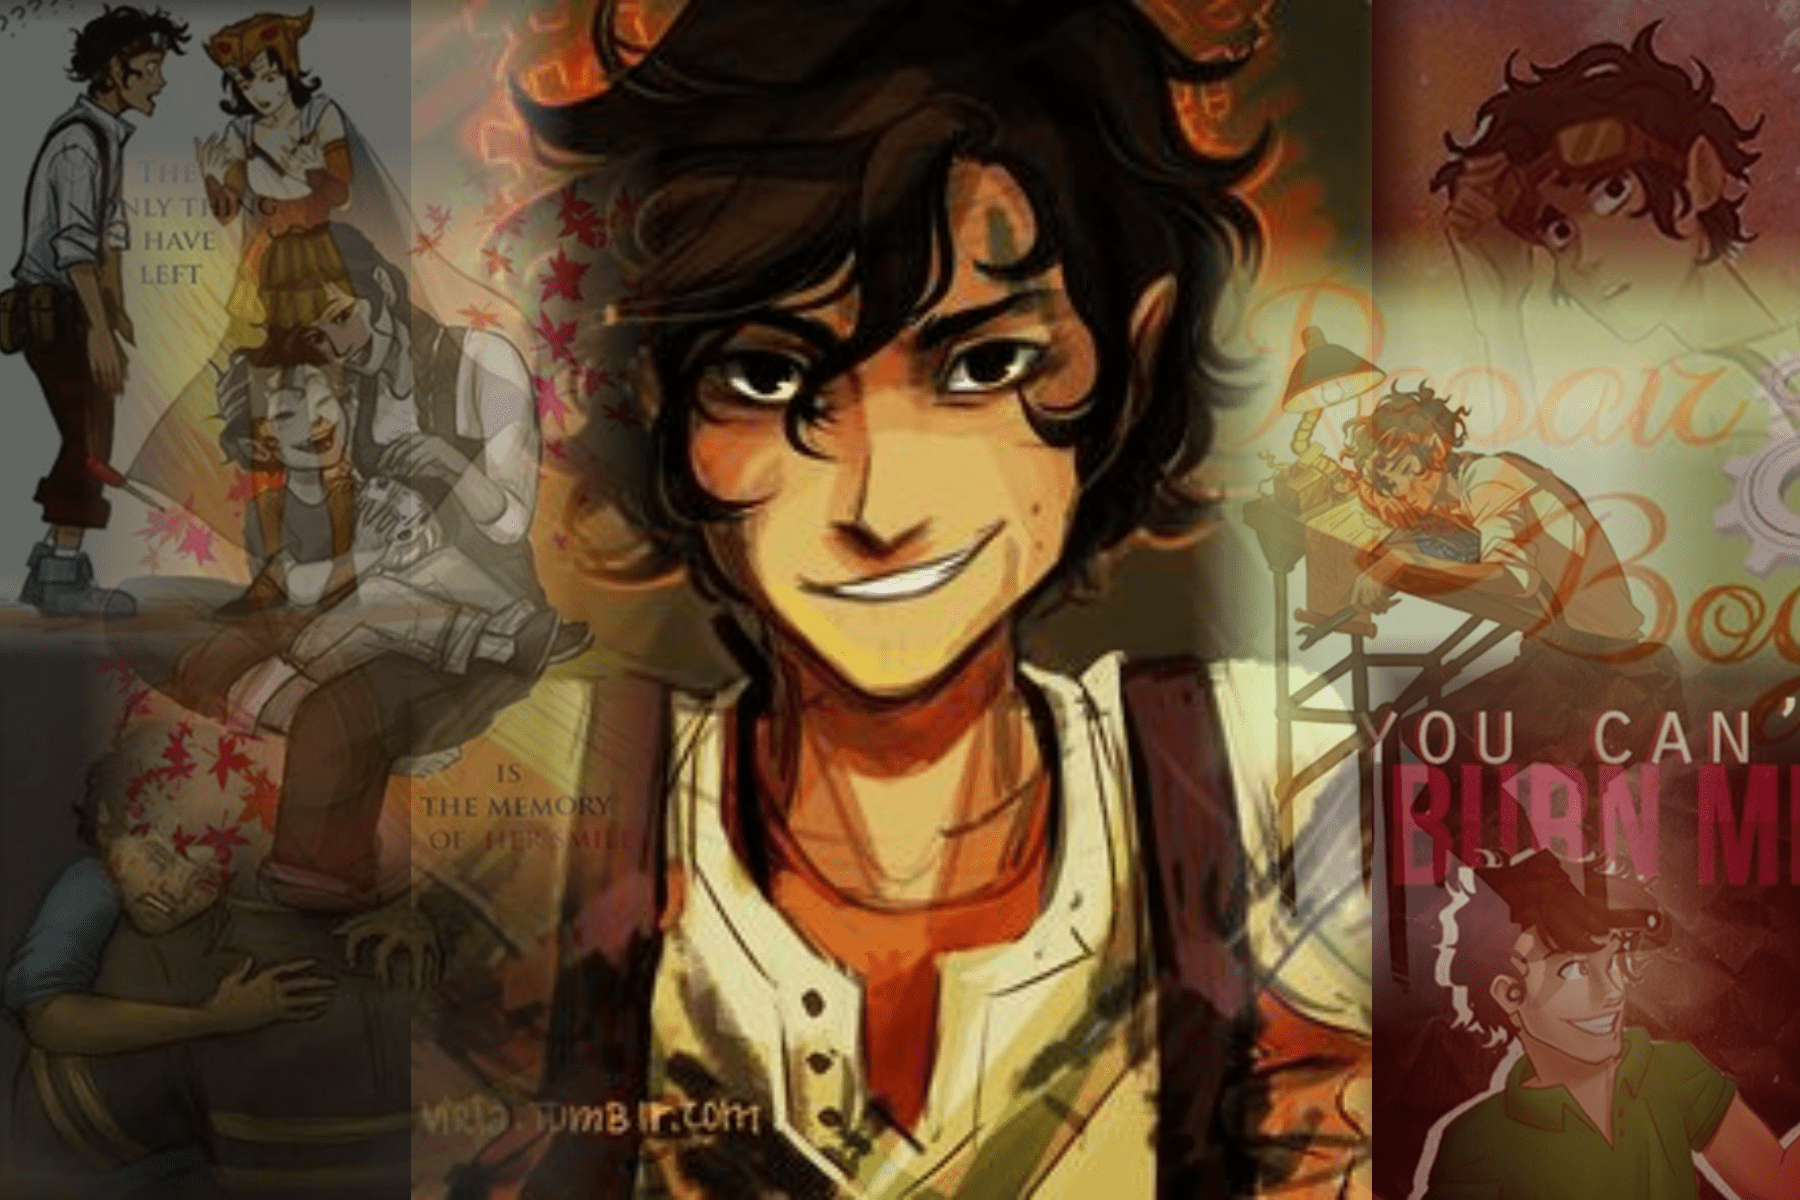 A collage of illustrations of a young man with dark hair and a red scarf. - Leo Valdez